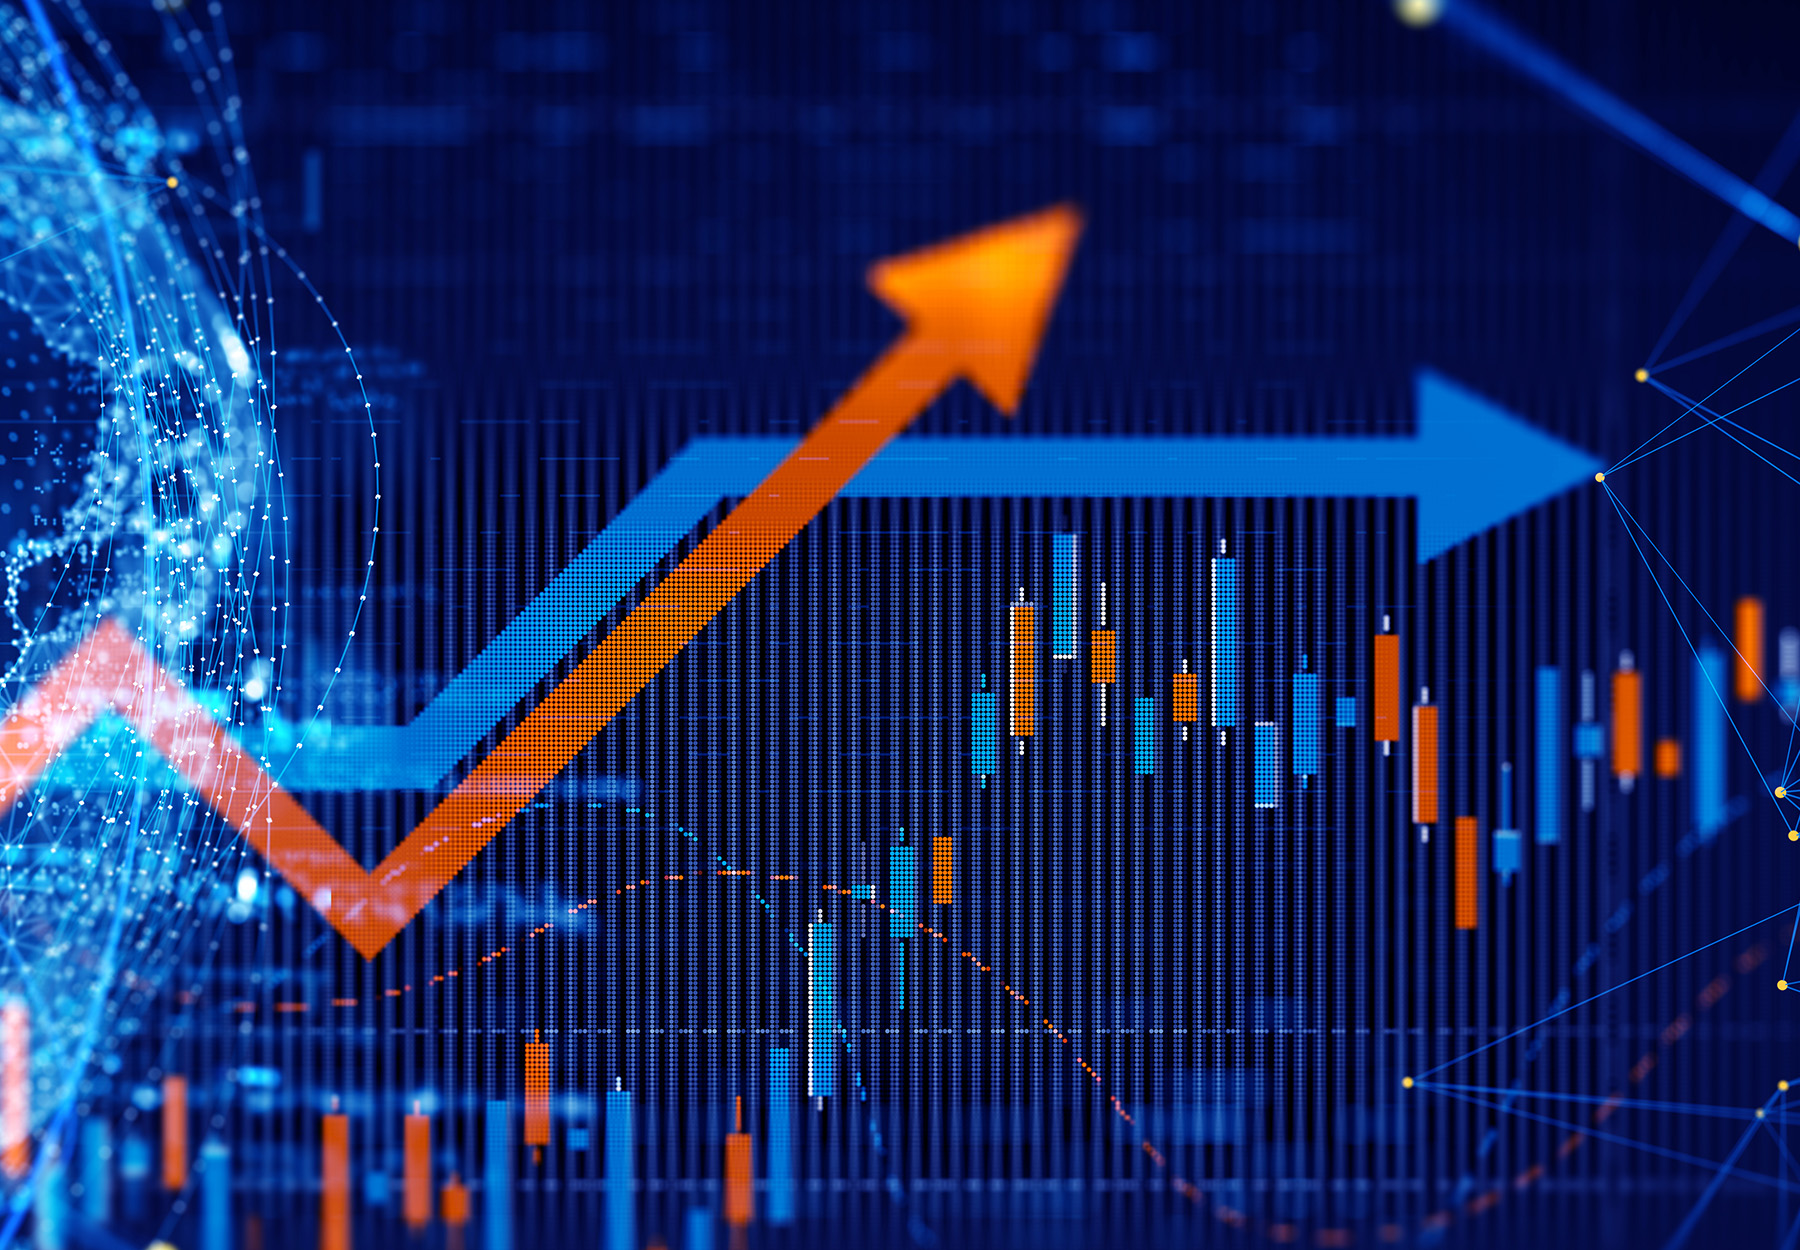 Abstract image of blue and orange graph with arrows pointing up and down. Financial results concept. iStock image.